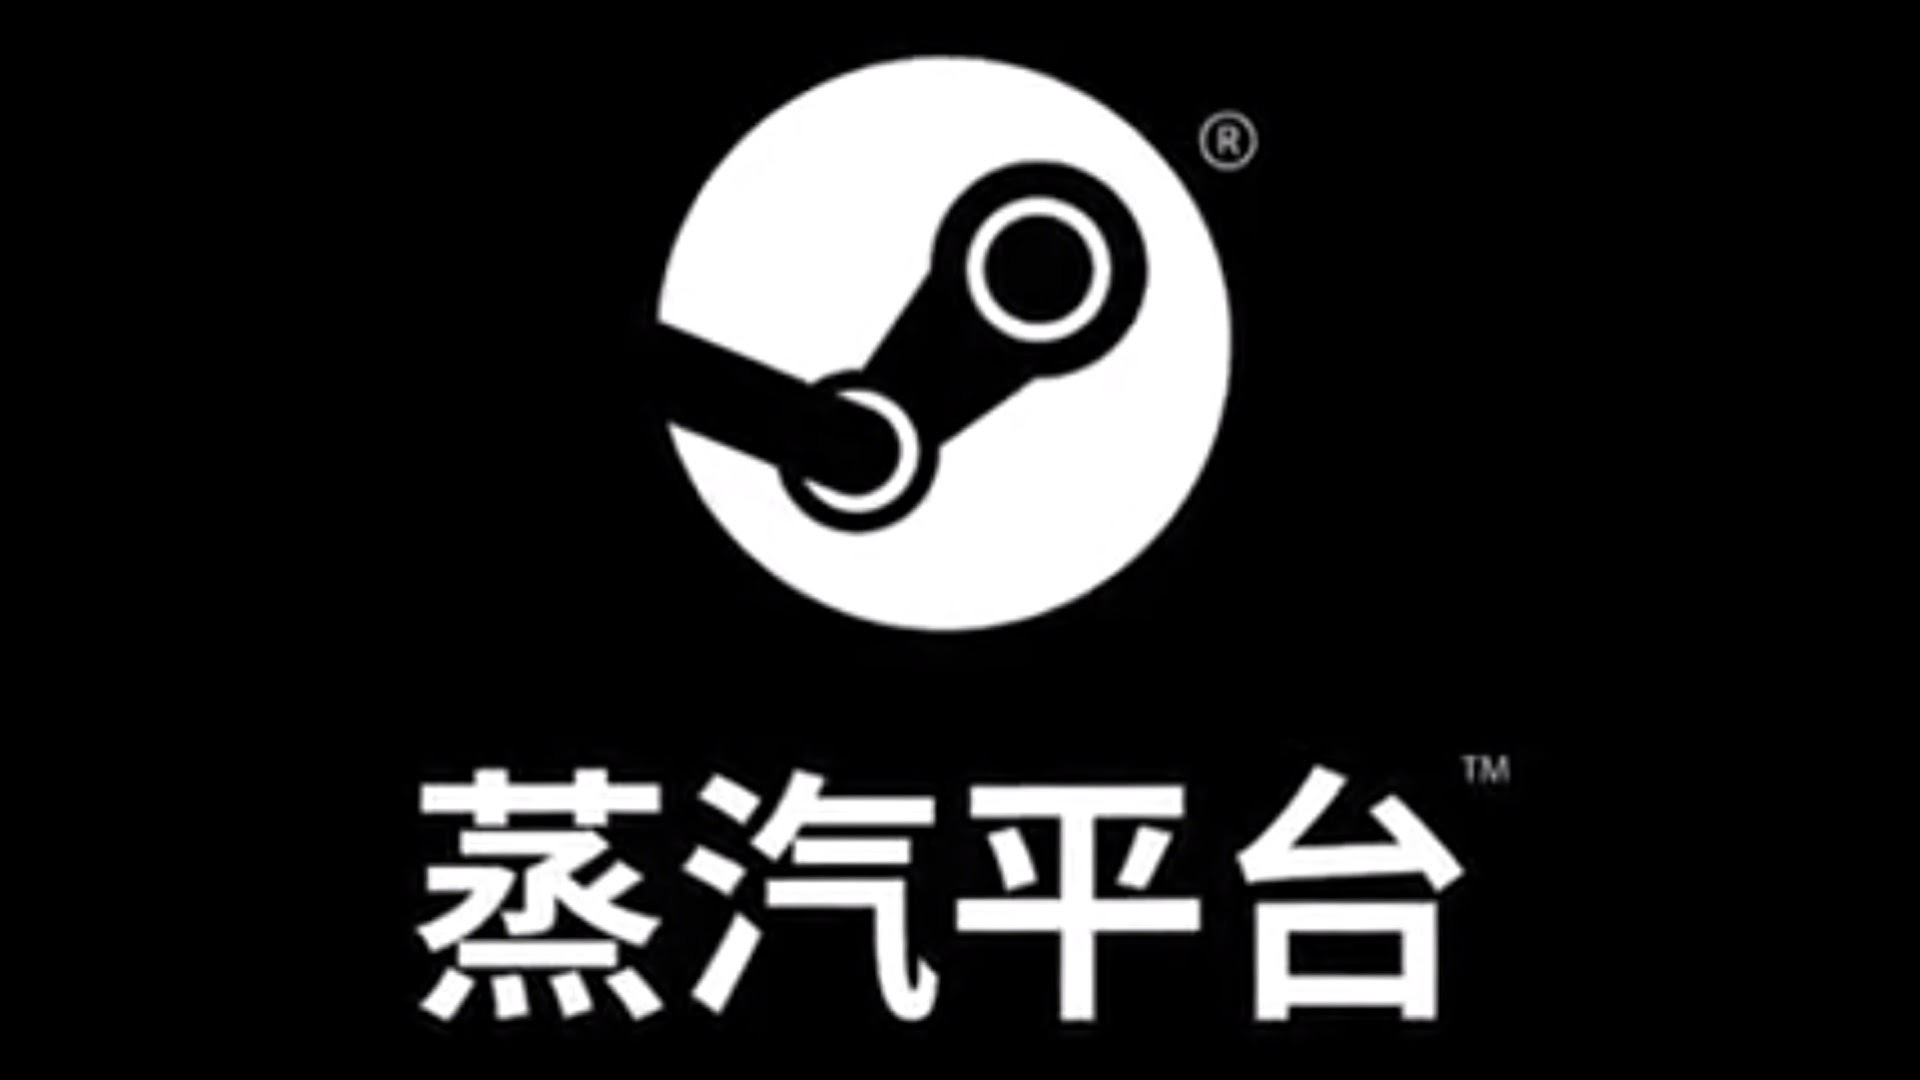 Chinese gamers are using a Steam wallpaper app to get porn past the censors